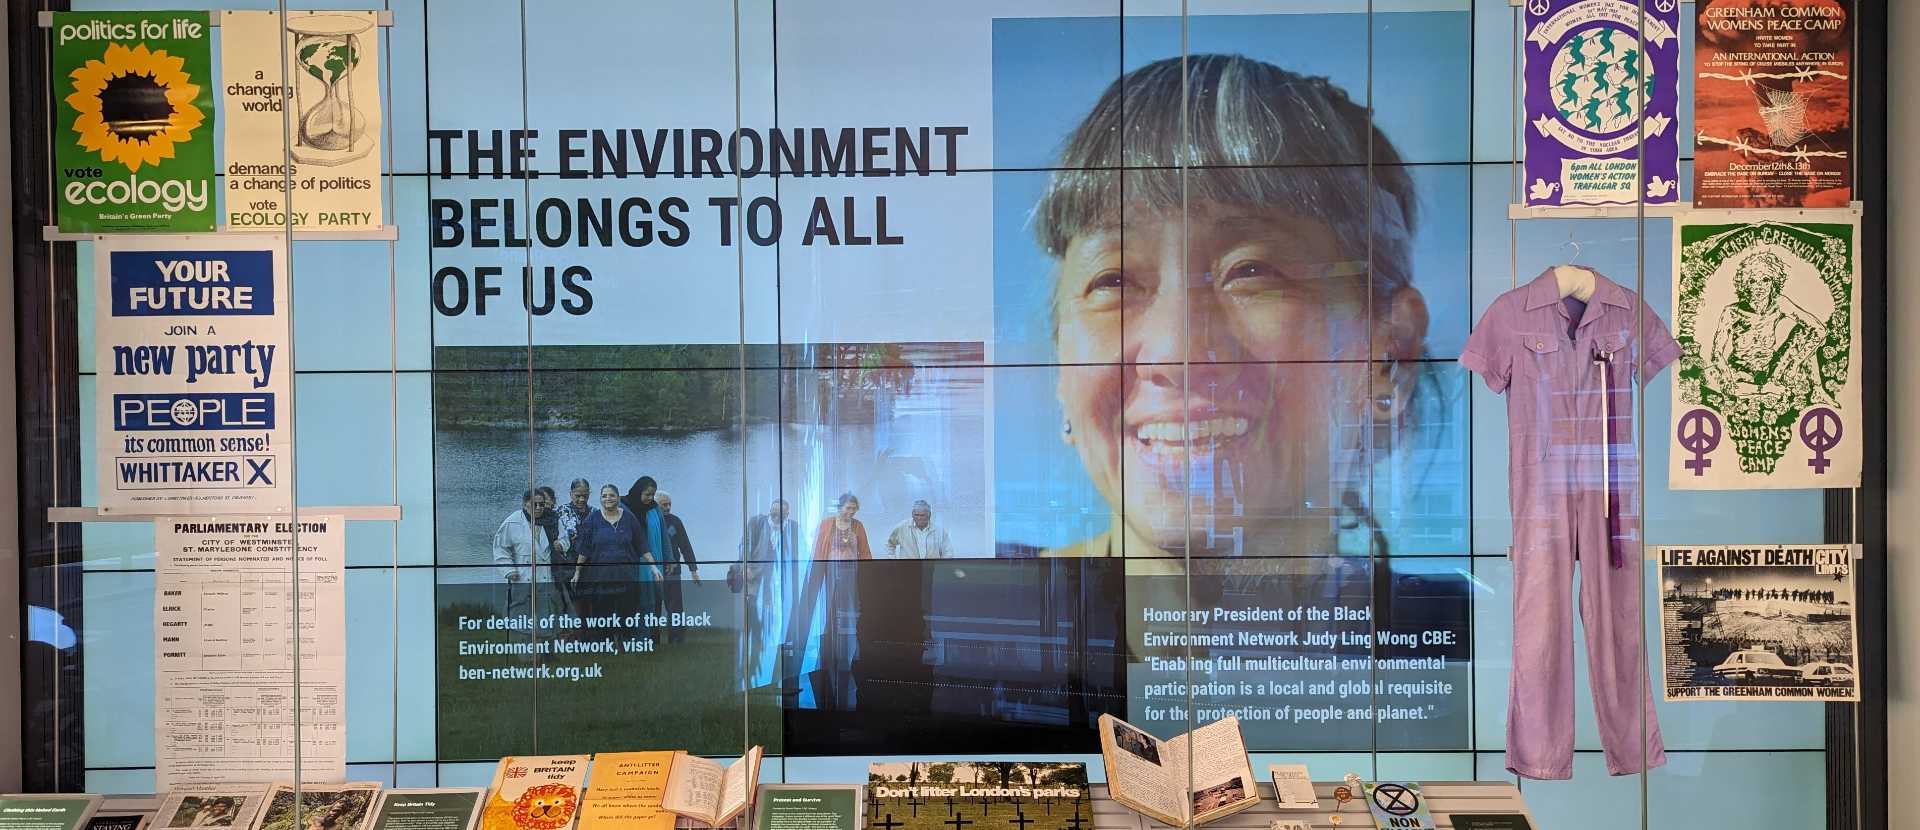 The exhibition video wall including a smiling Judy Ling Wong OBE